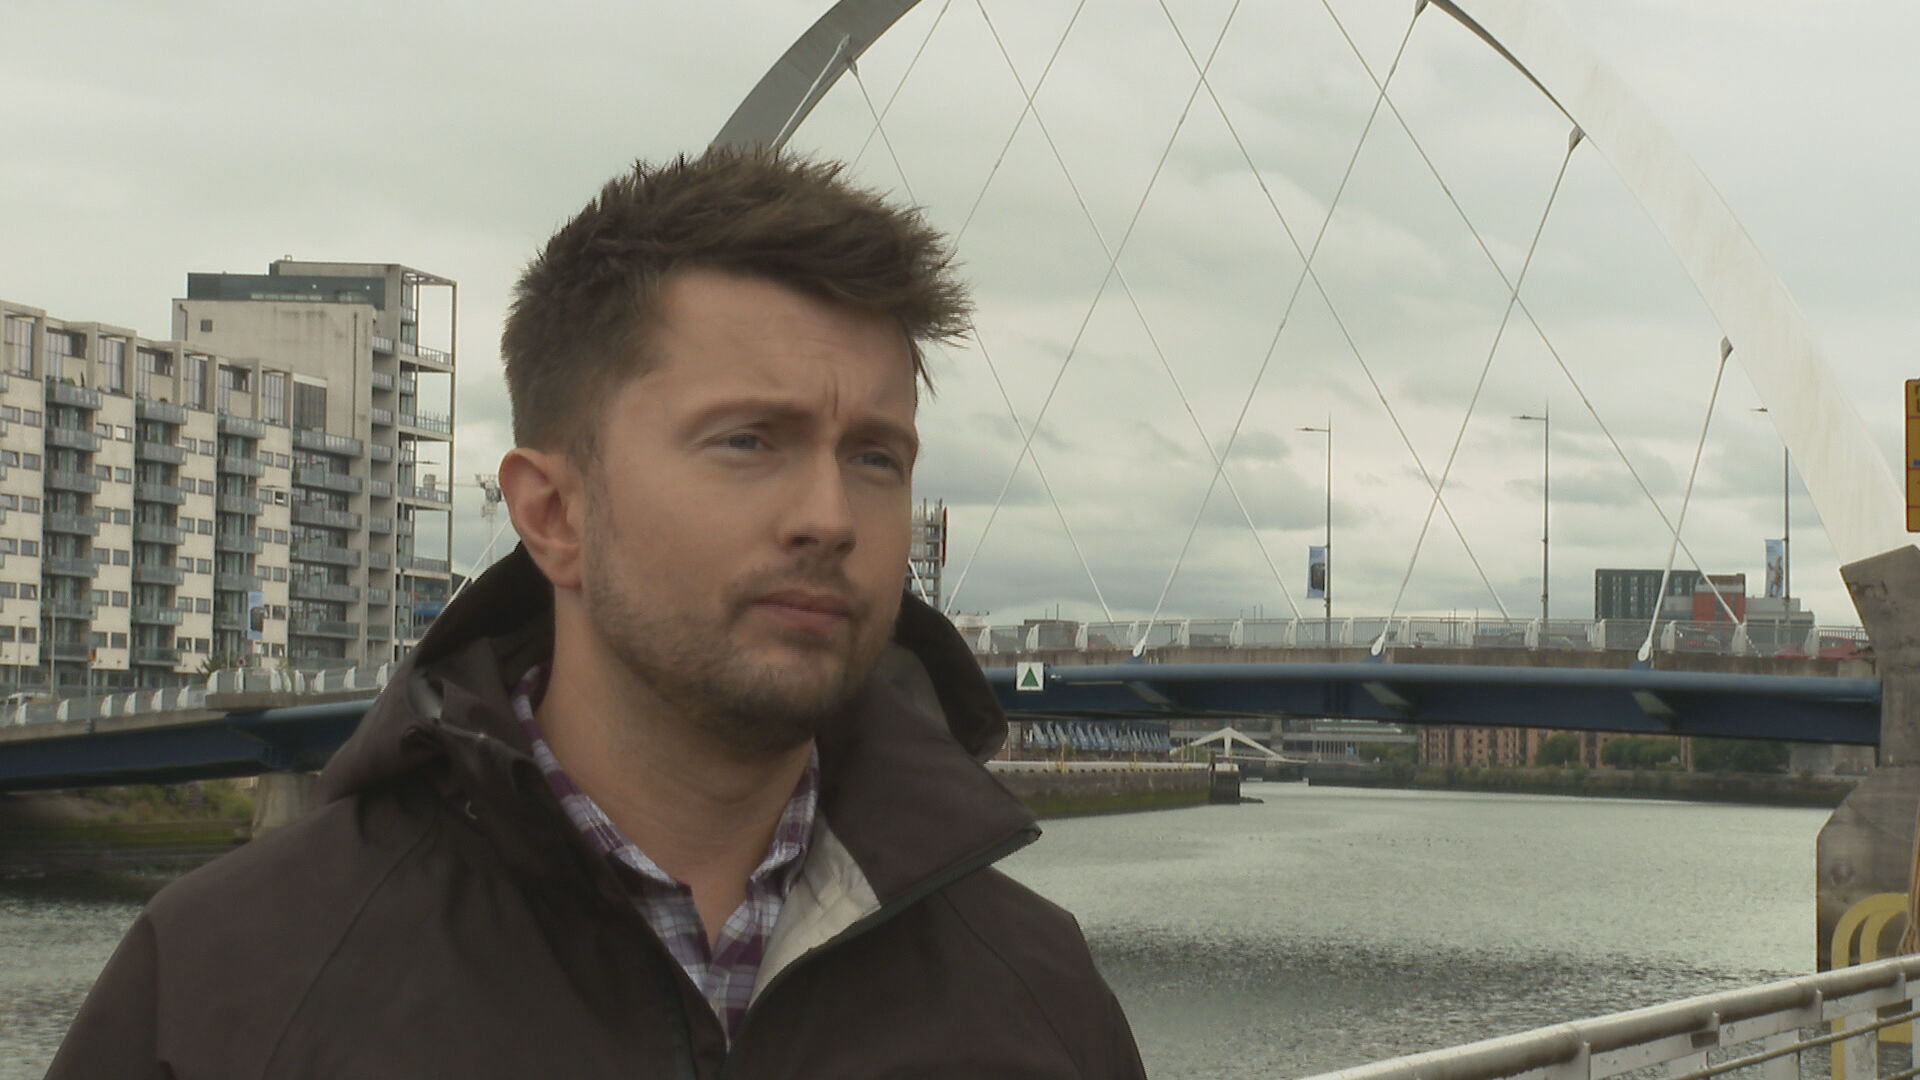 STV meteorologist Sean Batty warned extreme weather conditions are now the 'new normal' in Scotland.